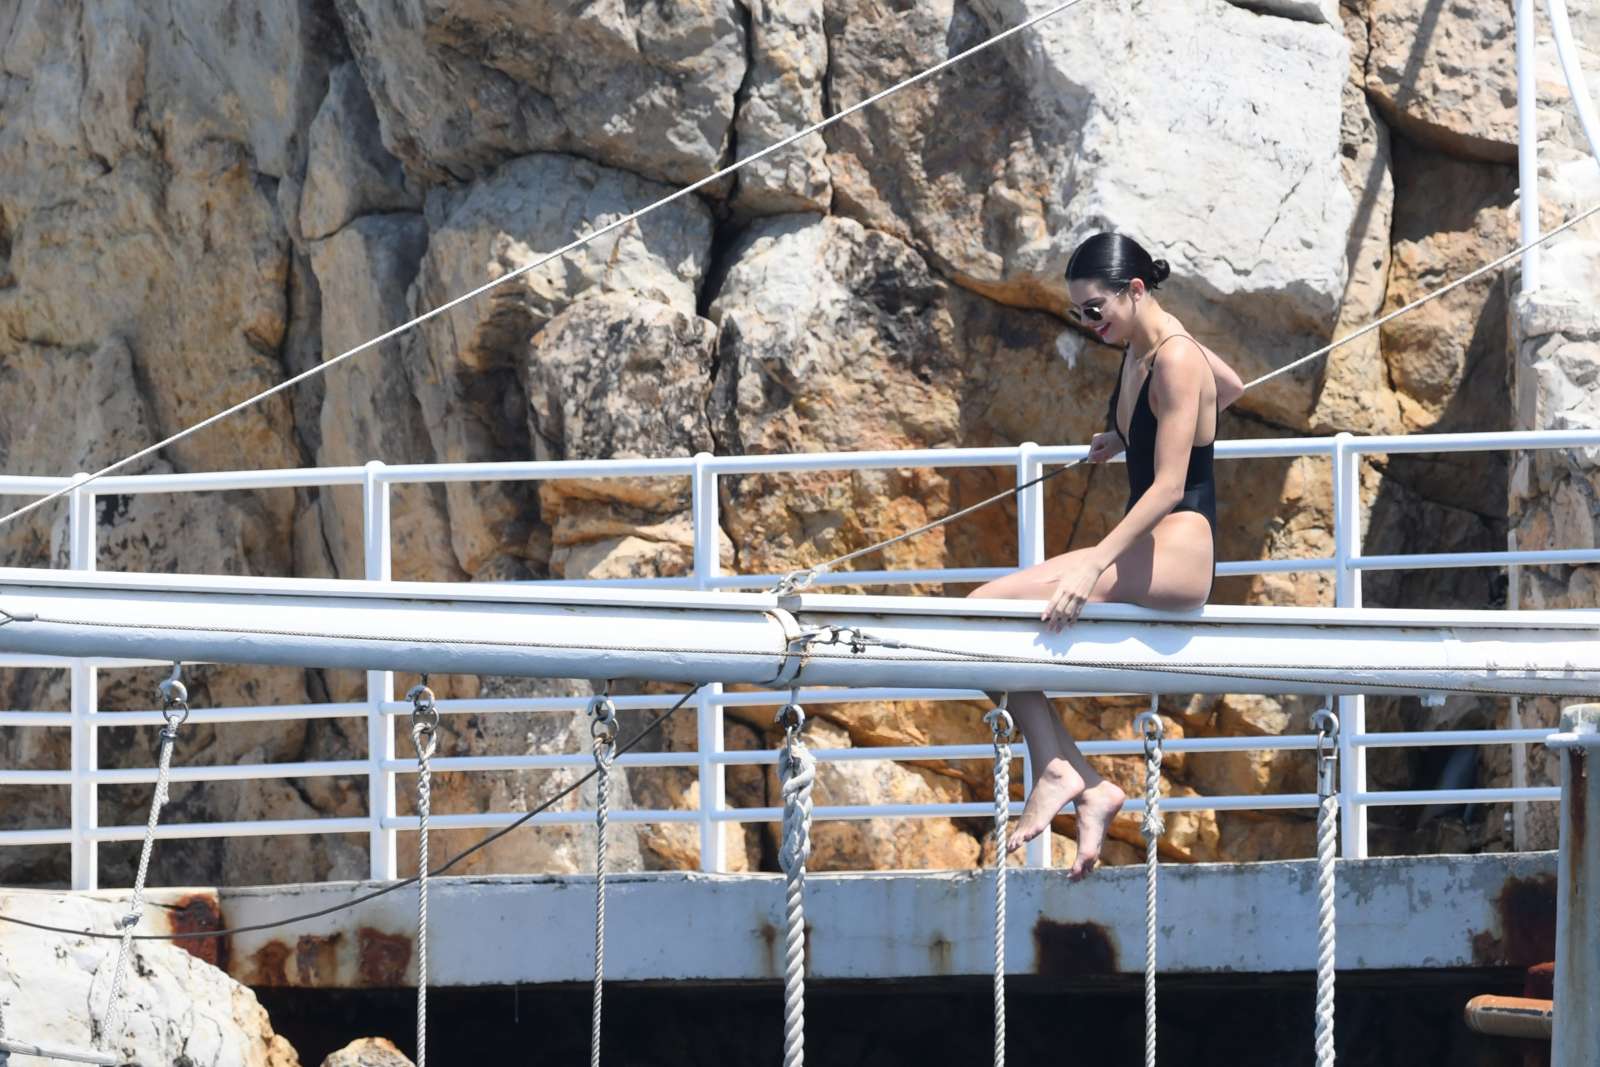 Kendall Jenner in Black Swimsuit at Eden-Roc Hotel in Cannes